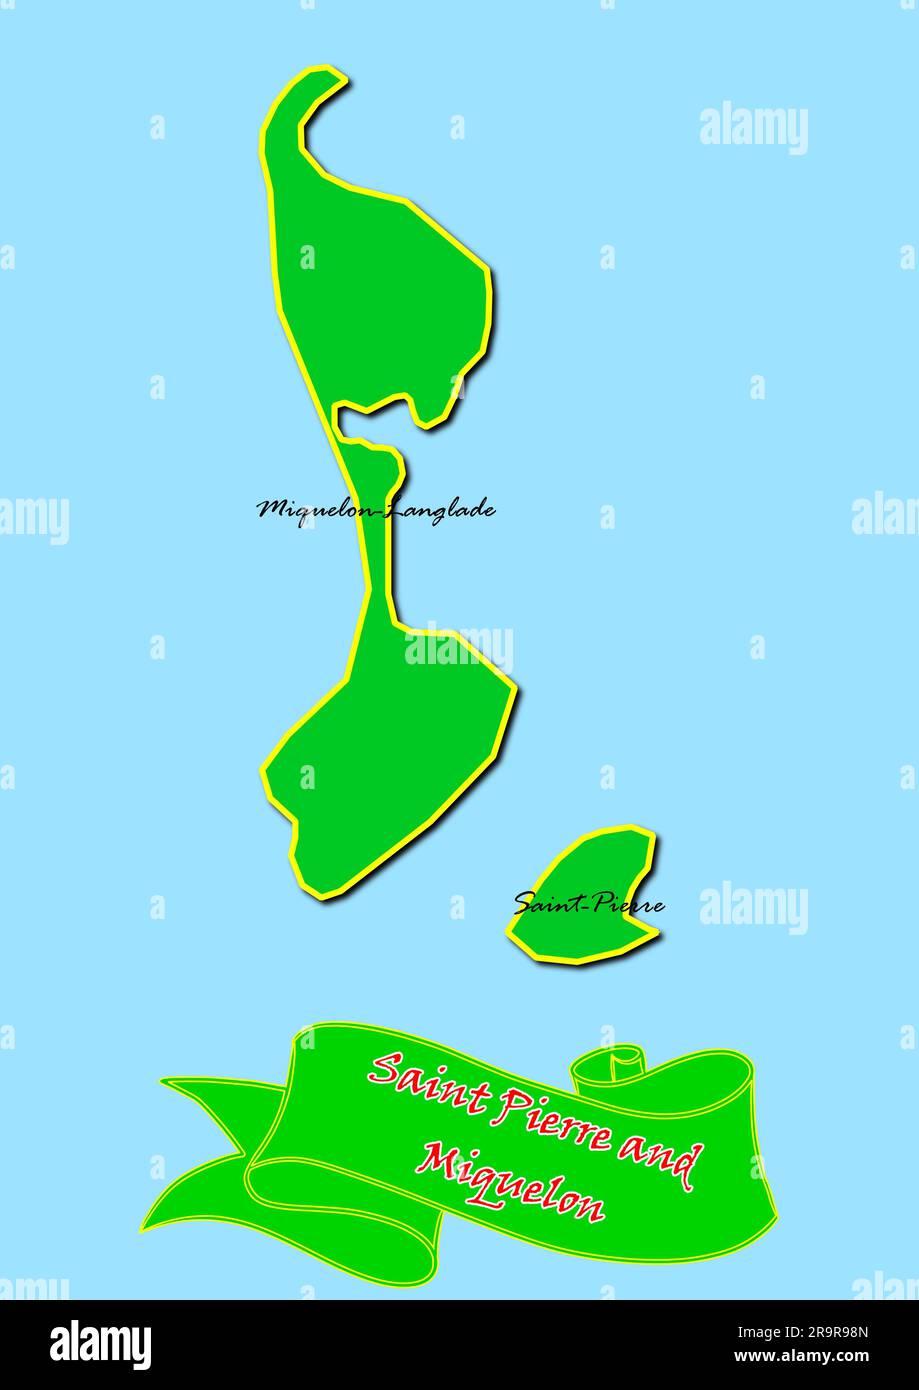 Map of Saint Pierre and Miquelon with Subregions in Green Country Name in Red Stock Photo